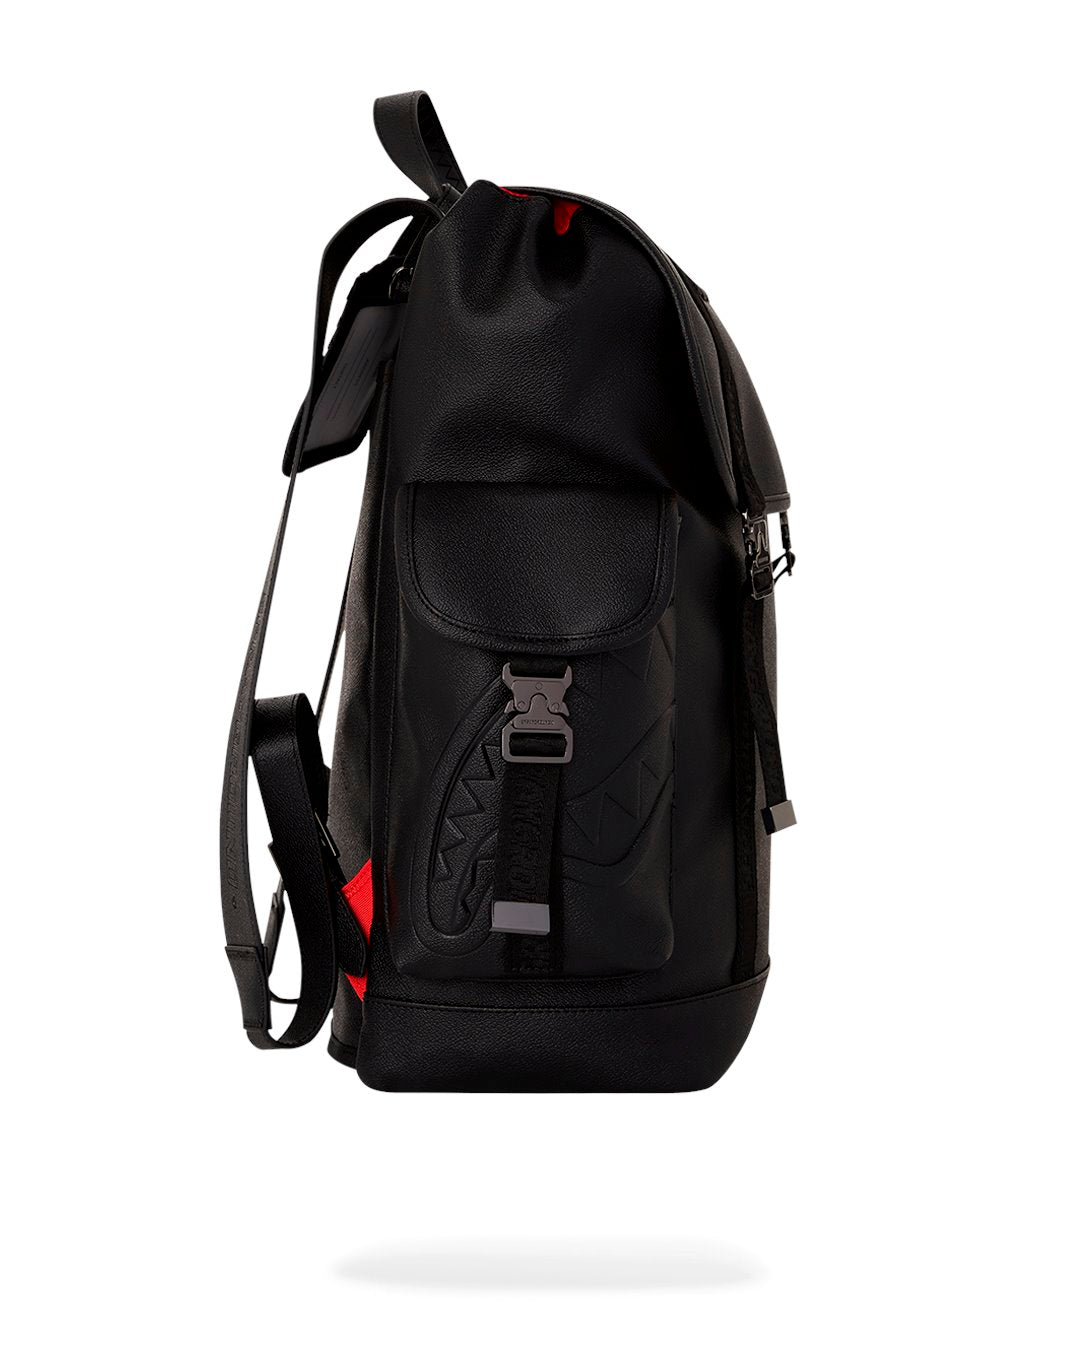 CORE BLACKOUT MONTE CARLO BACKPACK